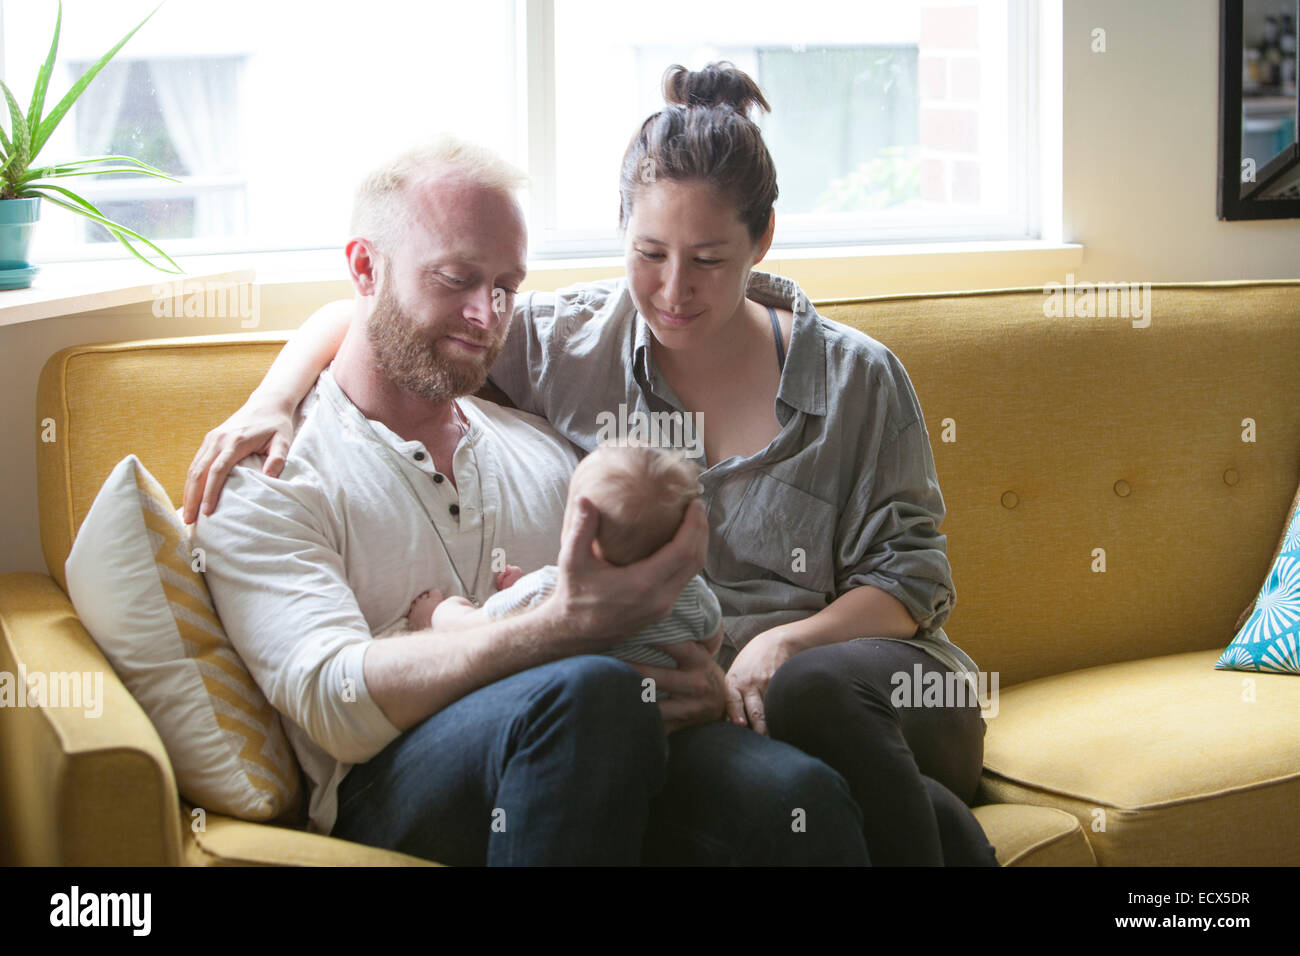 Parents smiling and holding little baby, sitting on yellow sofa Stock Photo